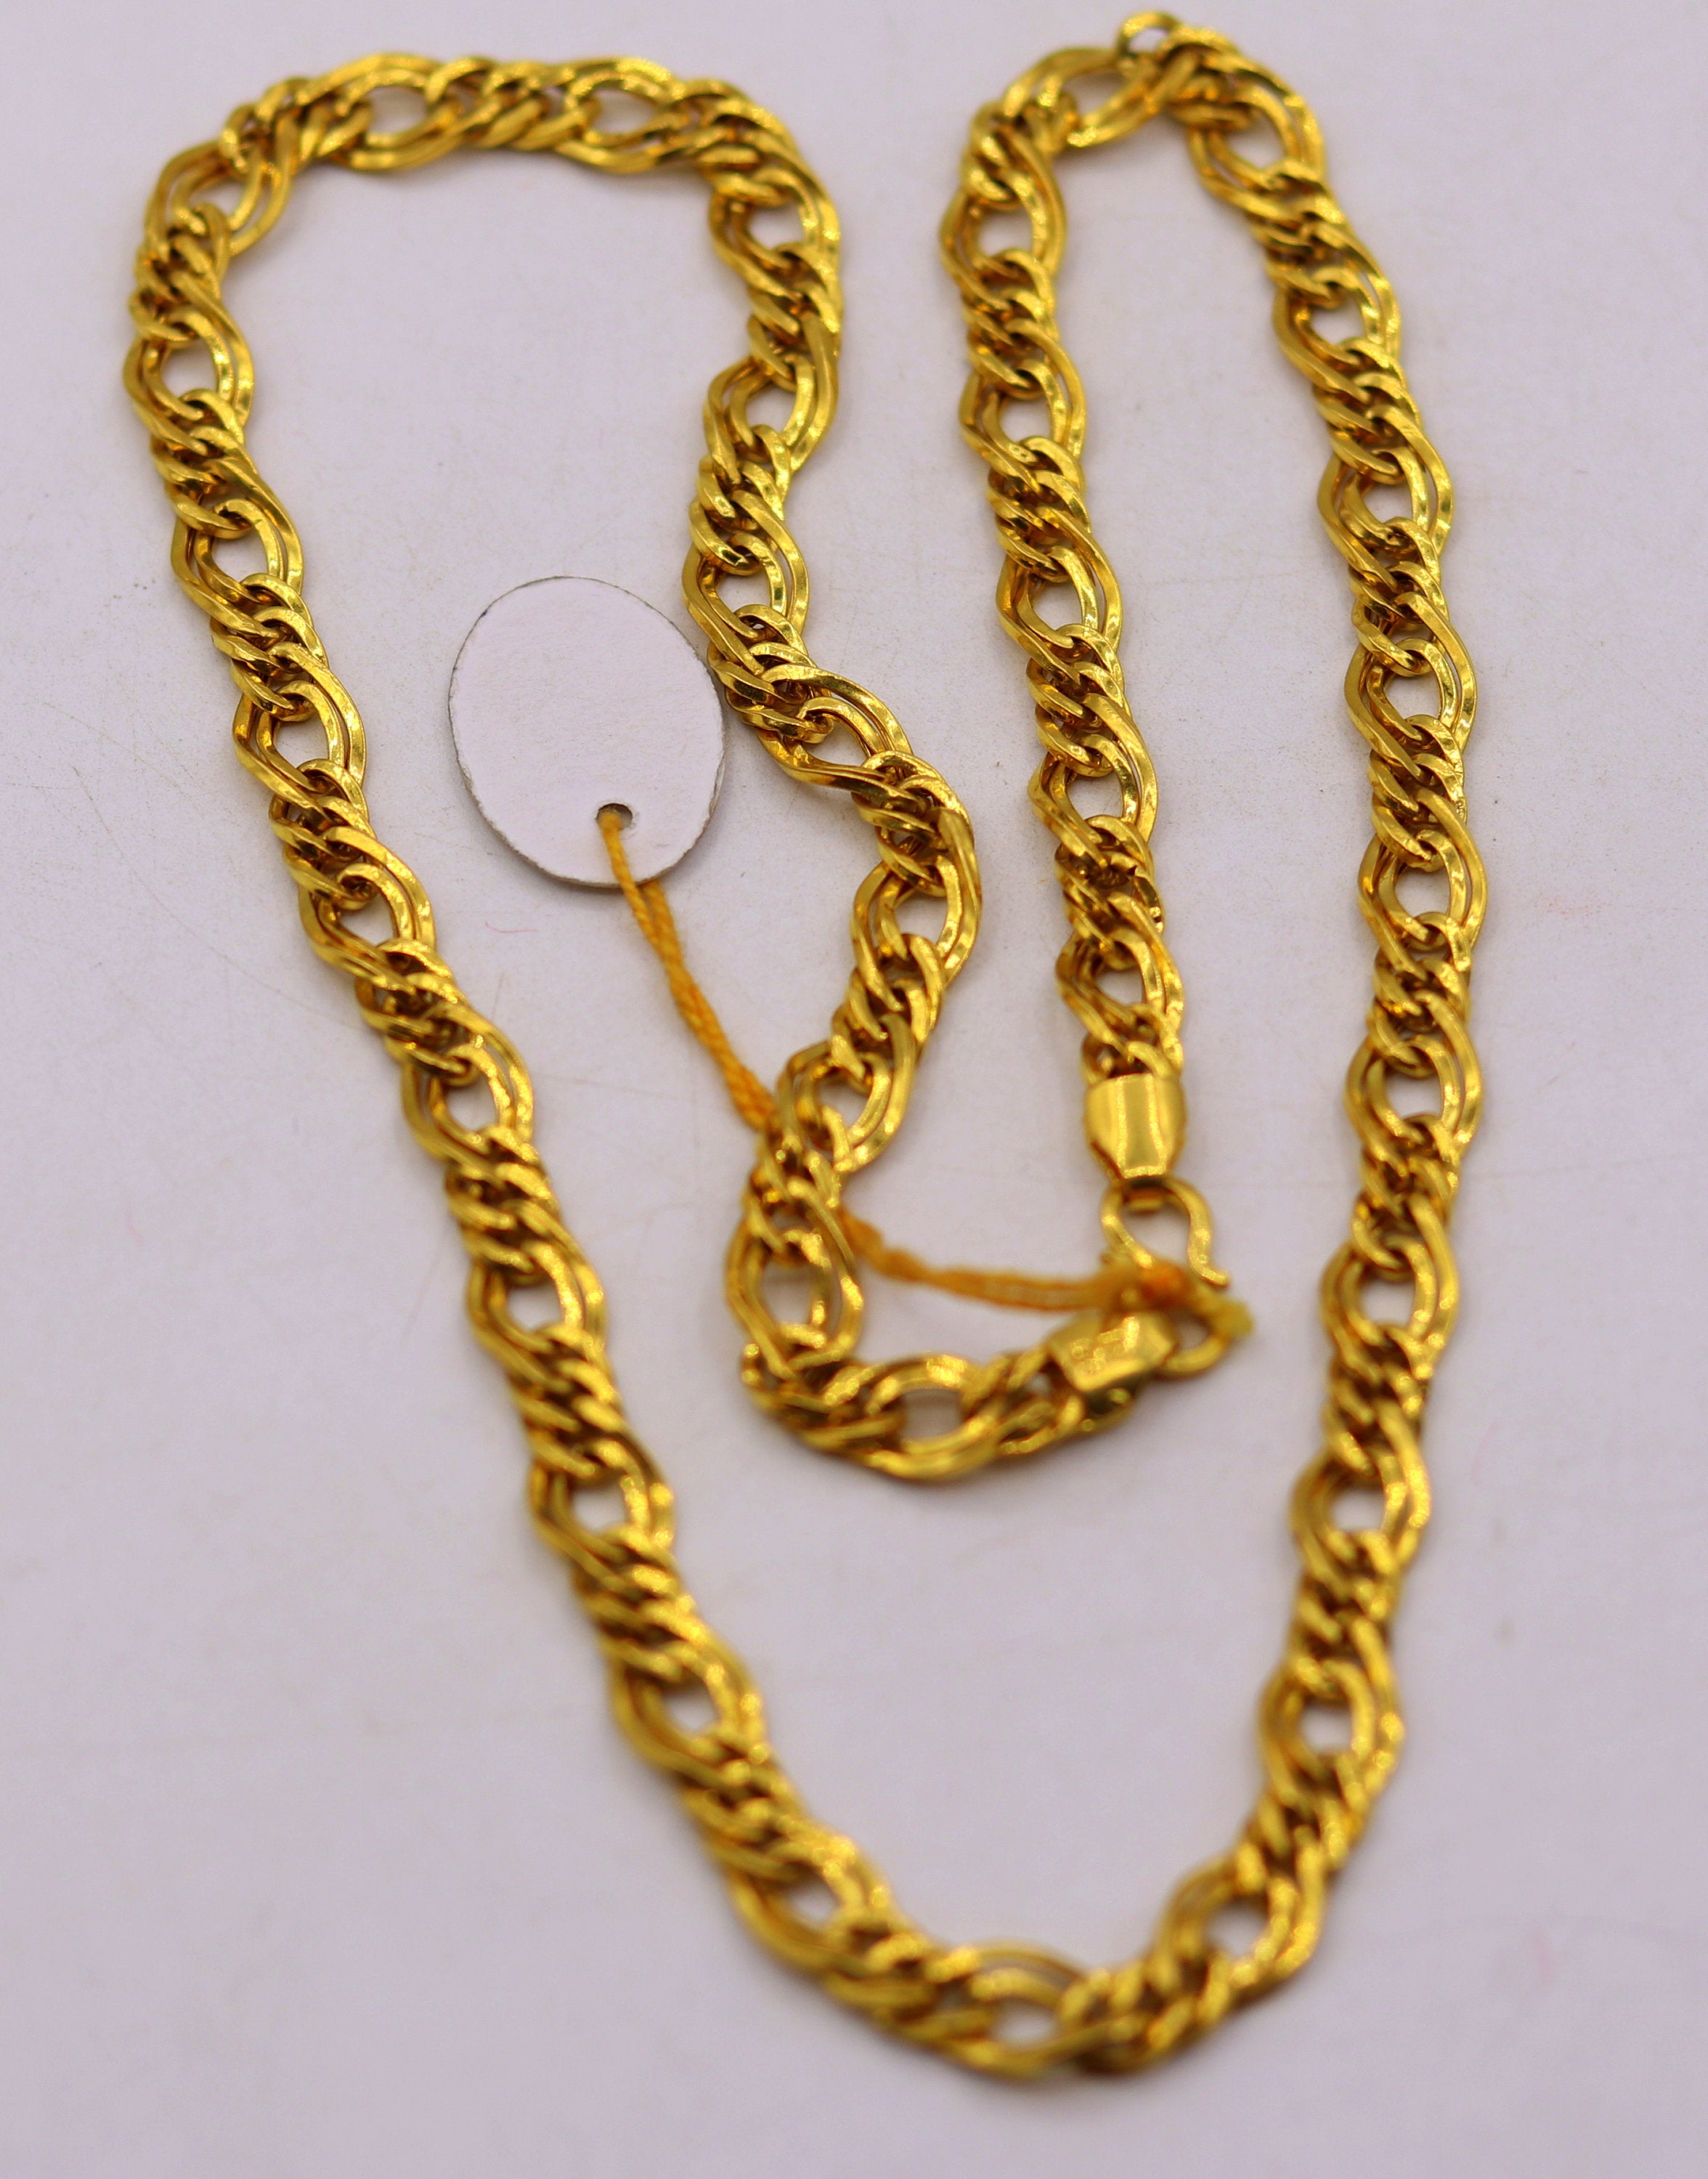 Double Loop Nivara Gold Chain for him priced under 300K - Candere by Kalyan  Jewellers